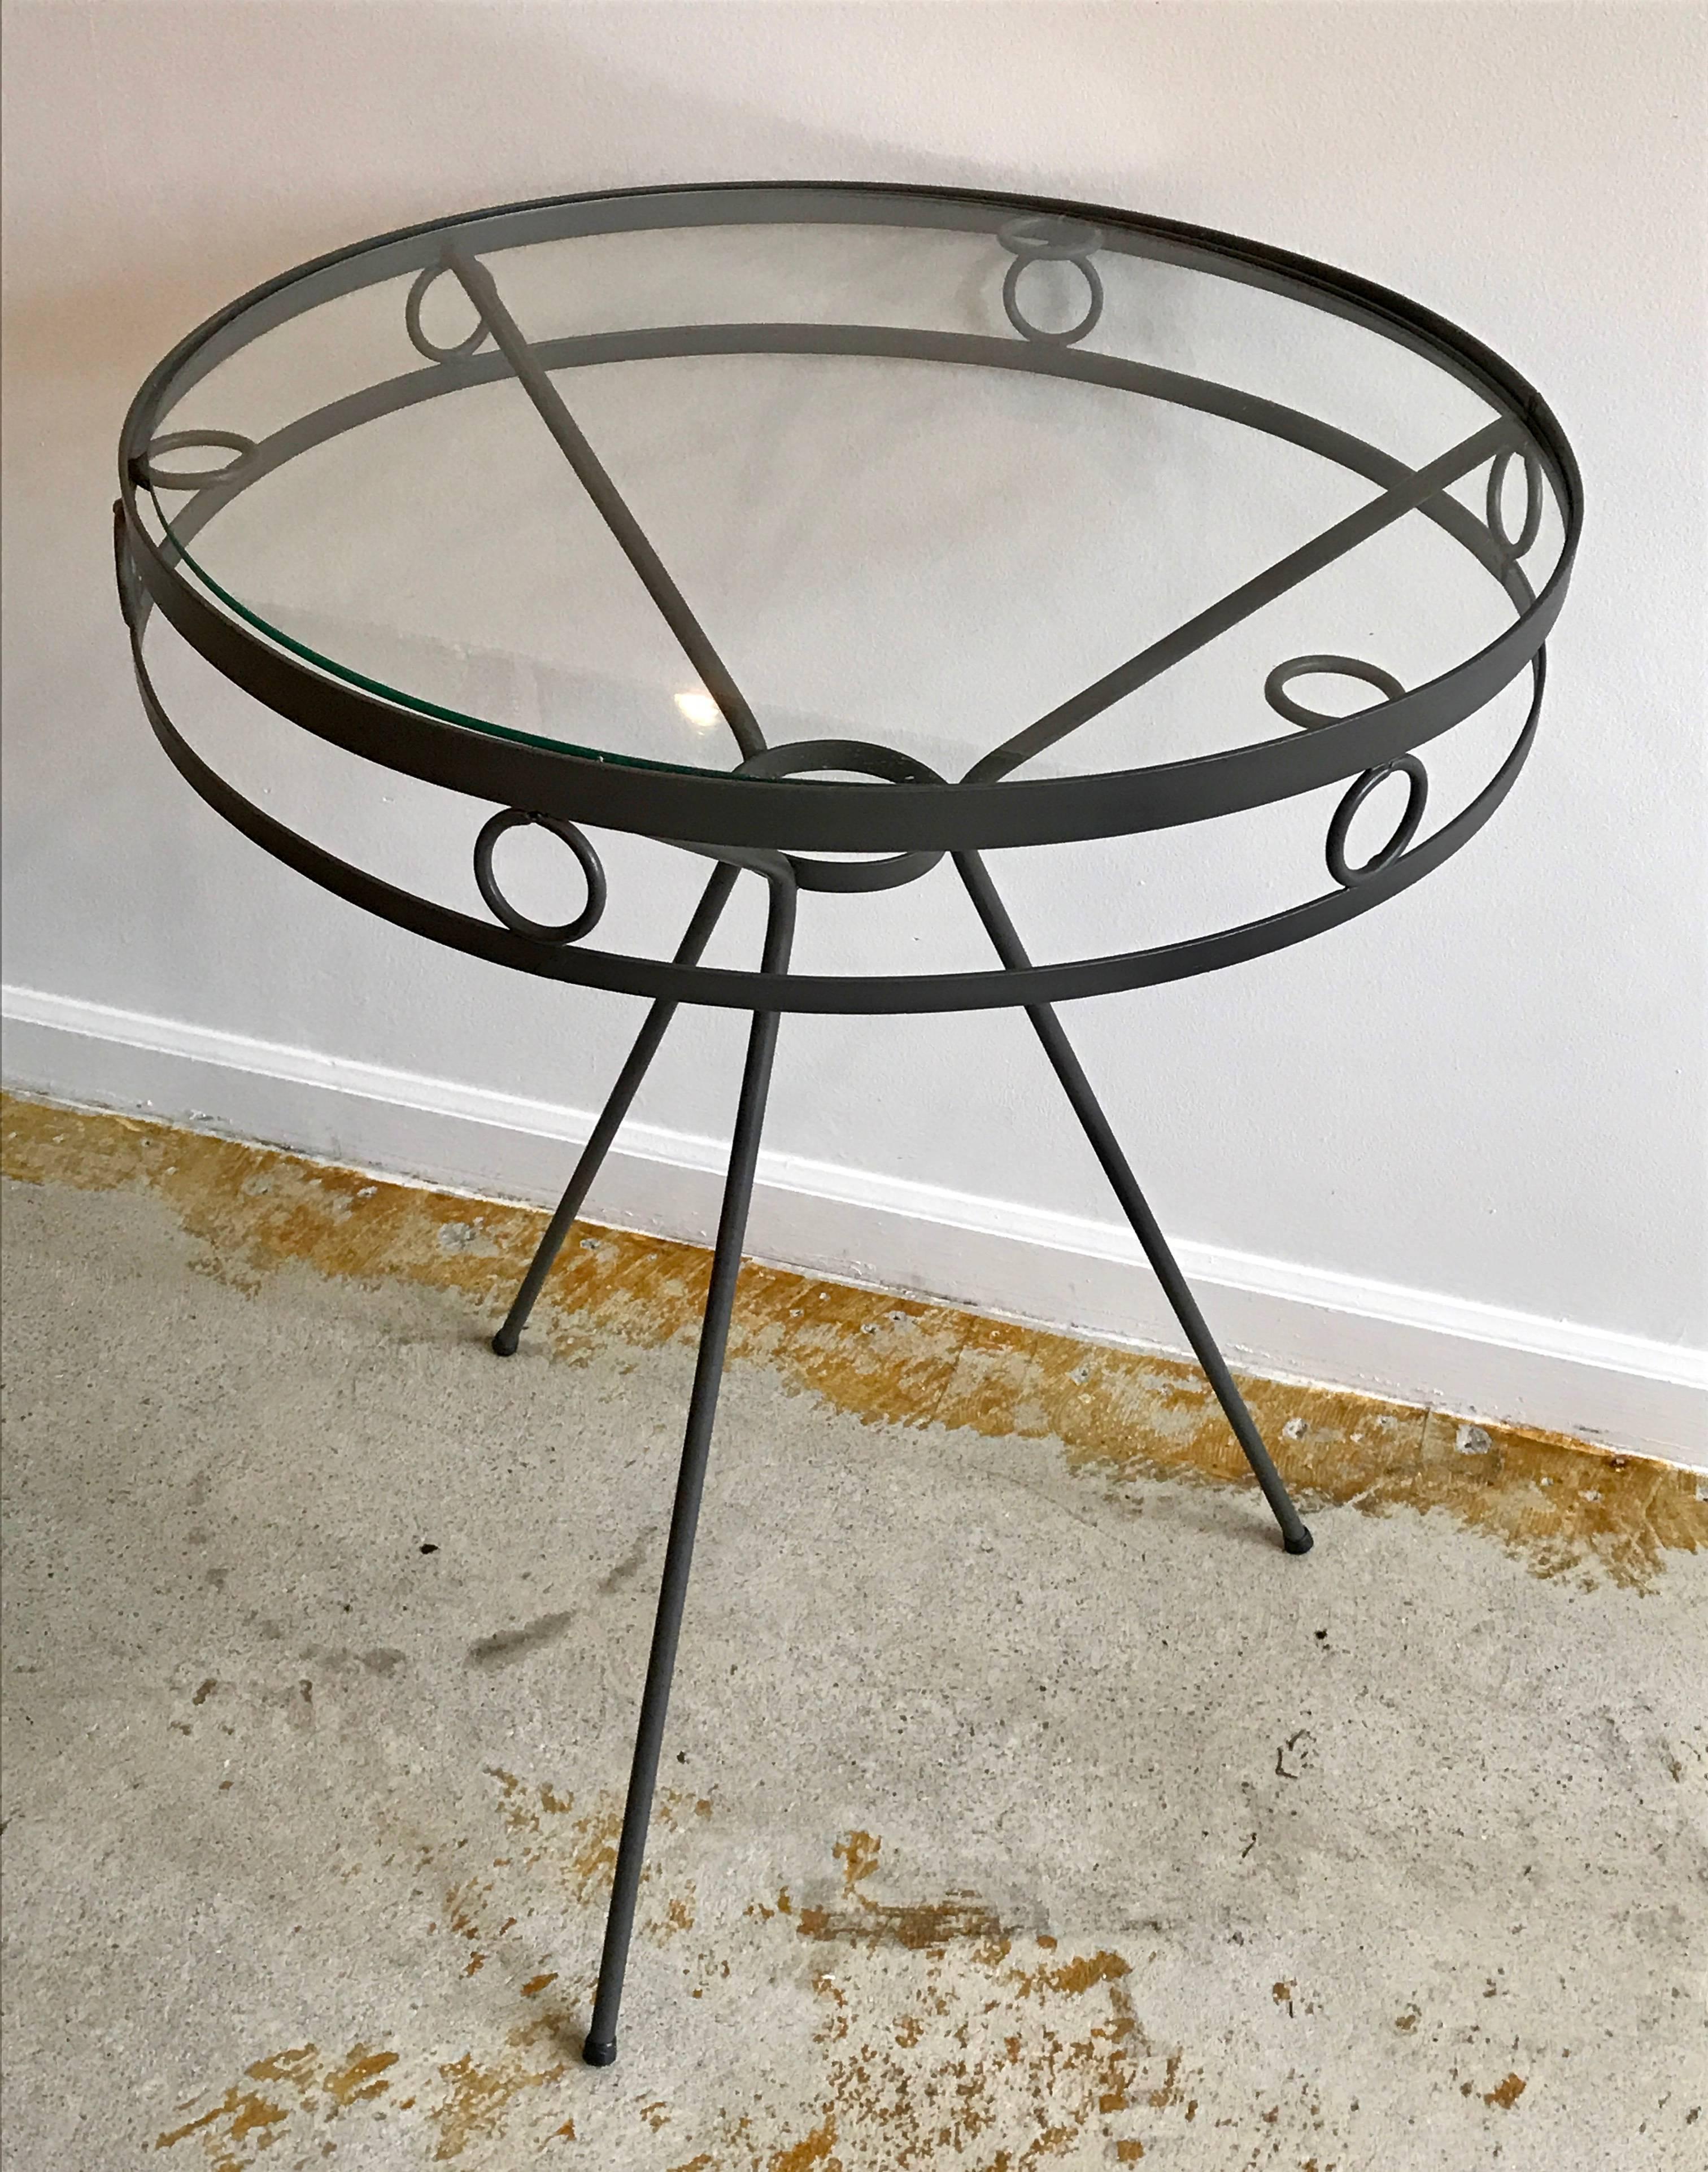 Very cool 1950s metal side tables or cafe tables with tripod legs and round ring accents. Freshly painted anodized bronze. Indoor/ outdoor. Minor surface scratches on glass tops.